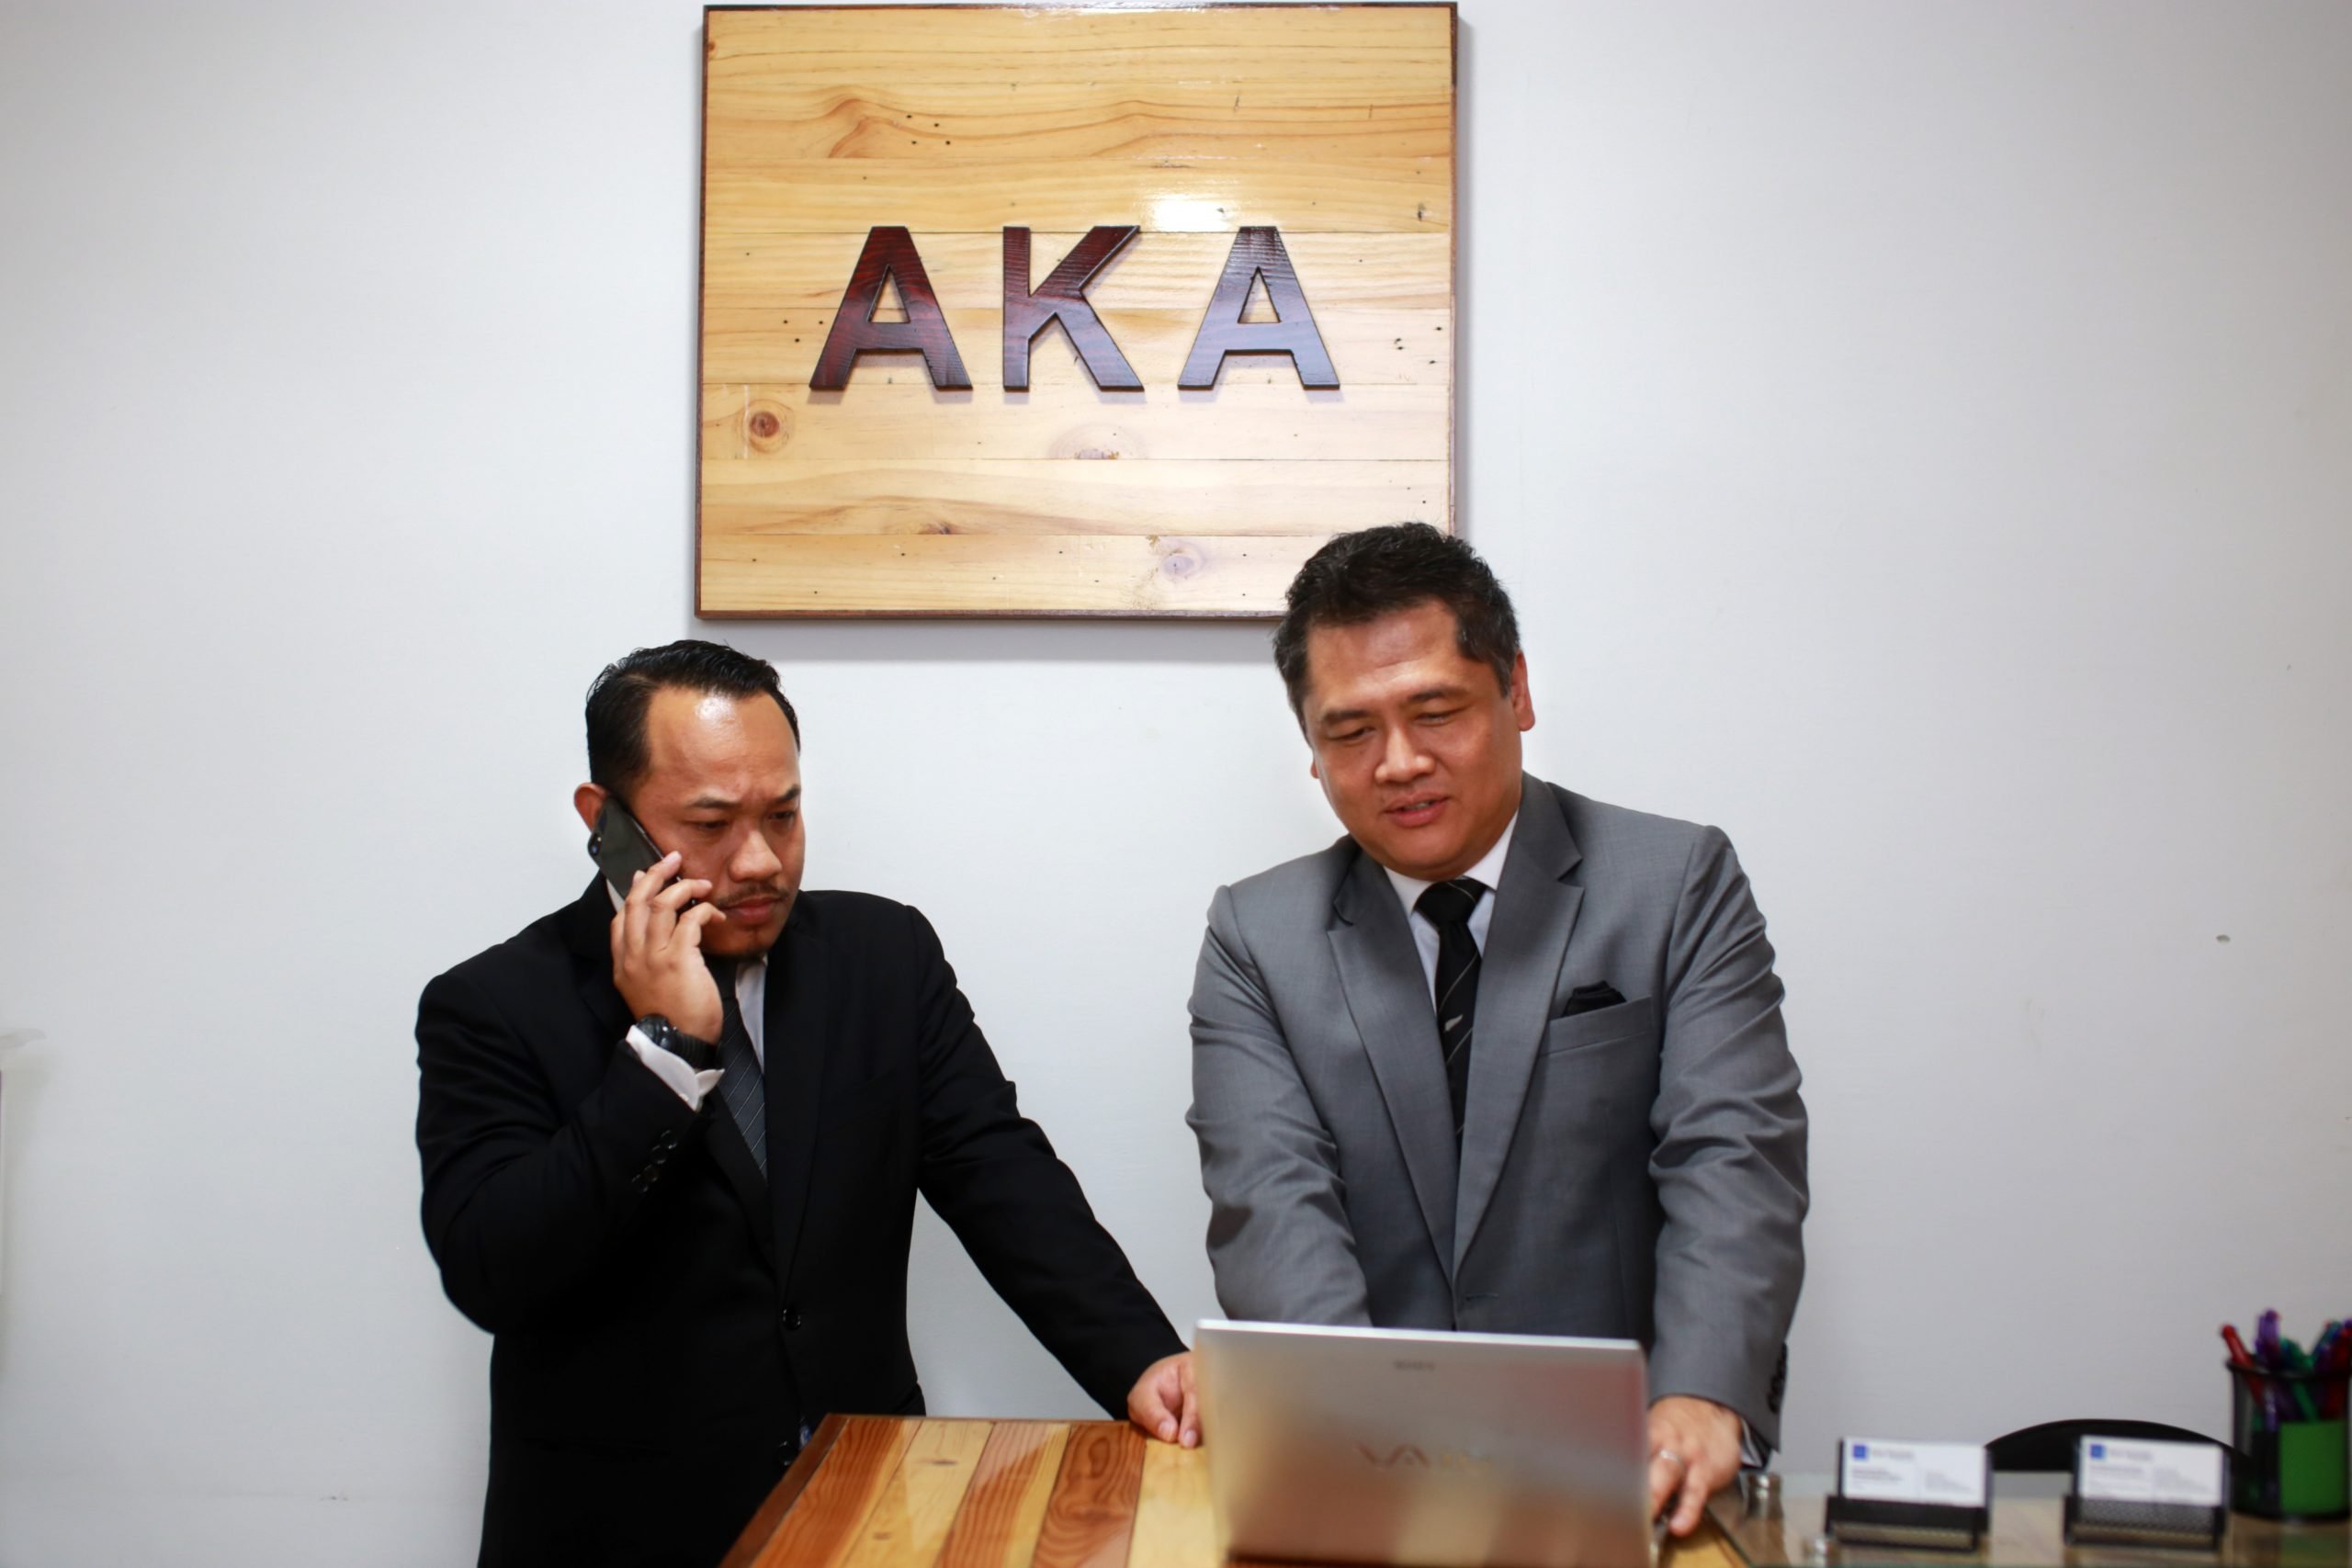 Two formally dressed men having a discussion in an office, one is making a call while the other is looking at the laptop's screen.